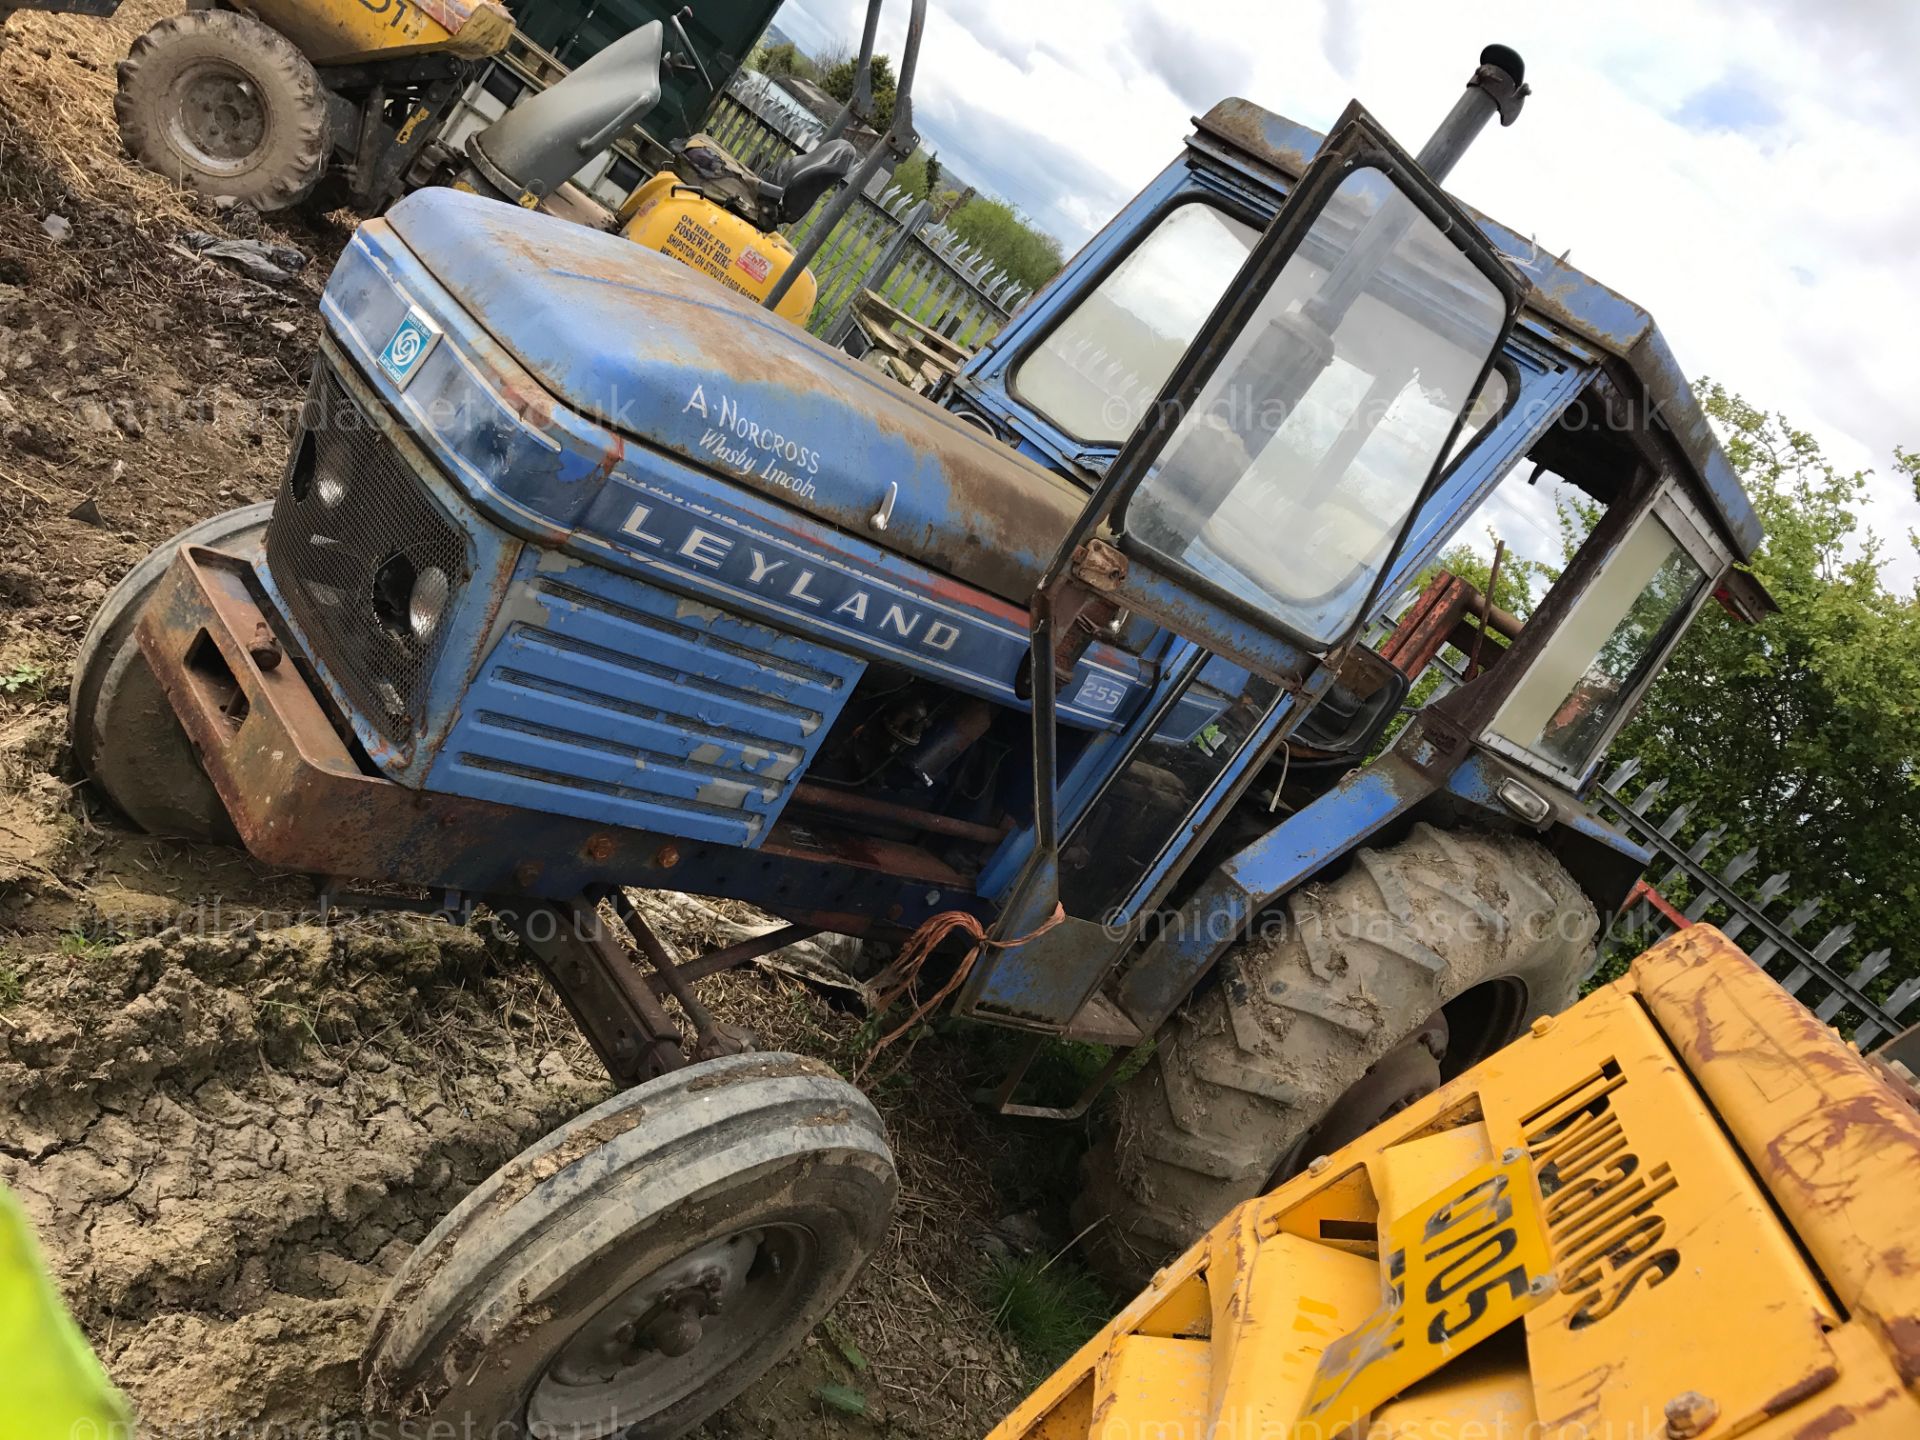 DS - LEYLAND 255 TRACTOR WITH BACK END LOADER   YEAR UNKNOWN FITTED WITH A BACK END LOADER - Image 2 of 6